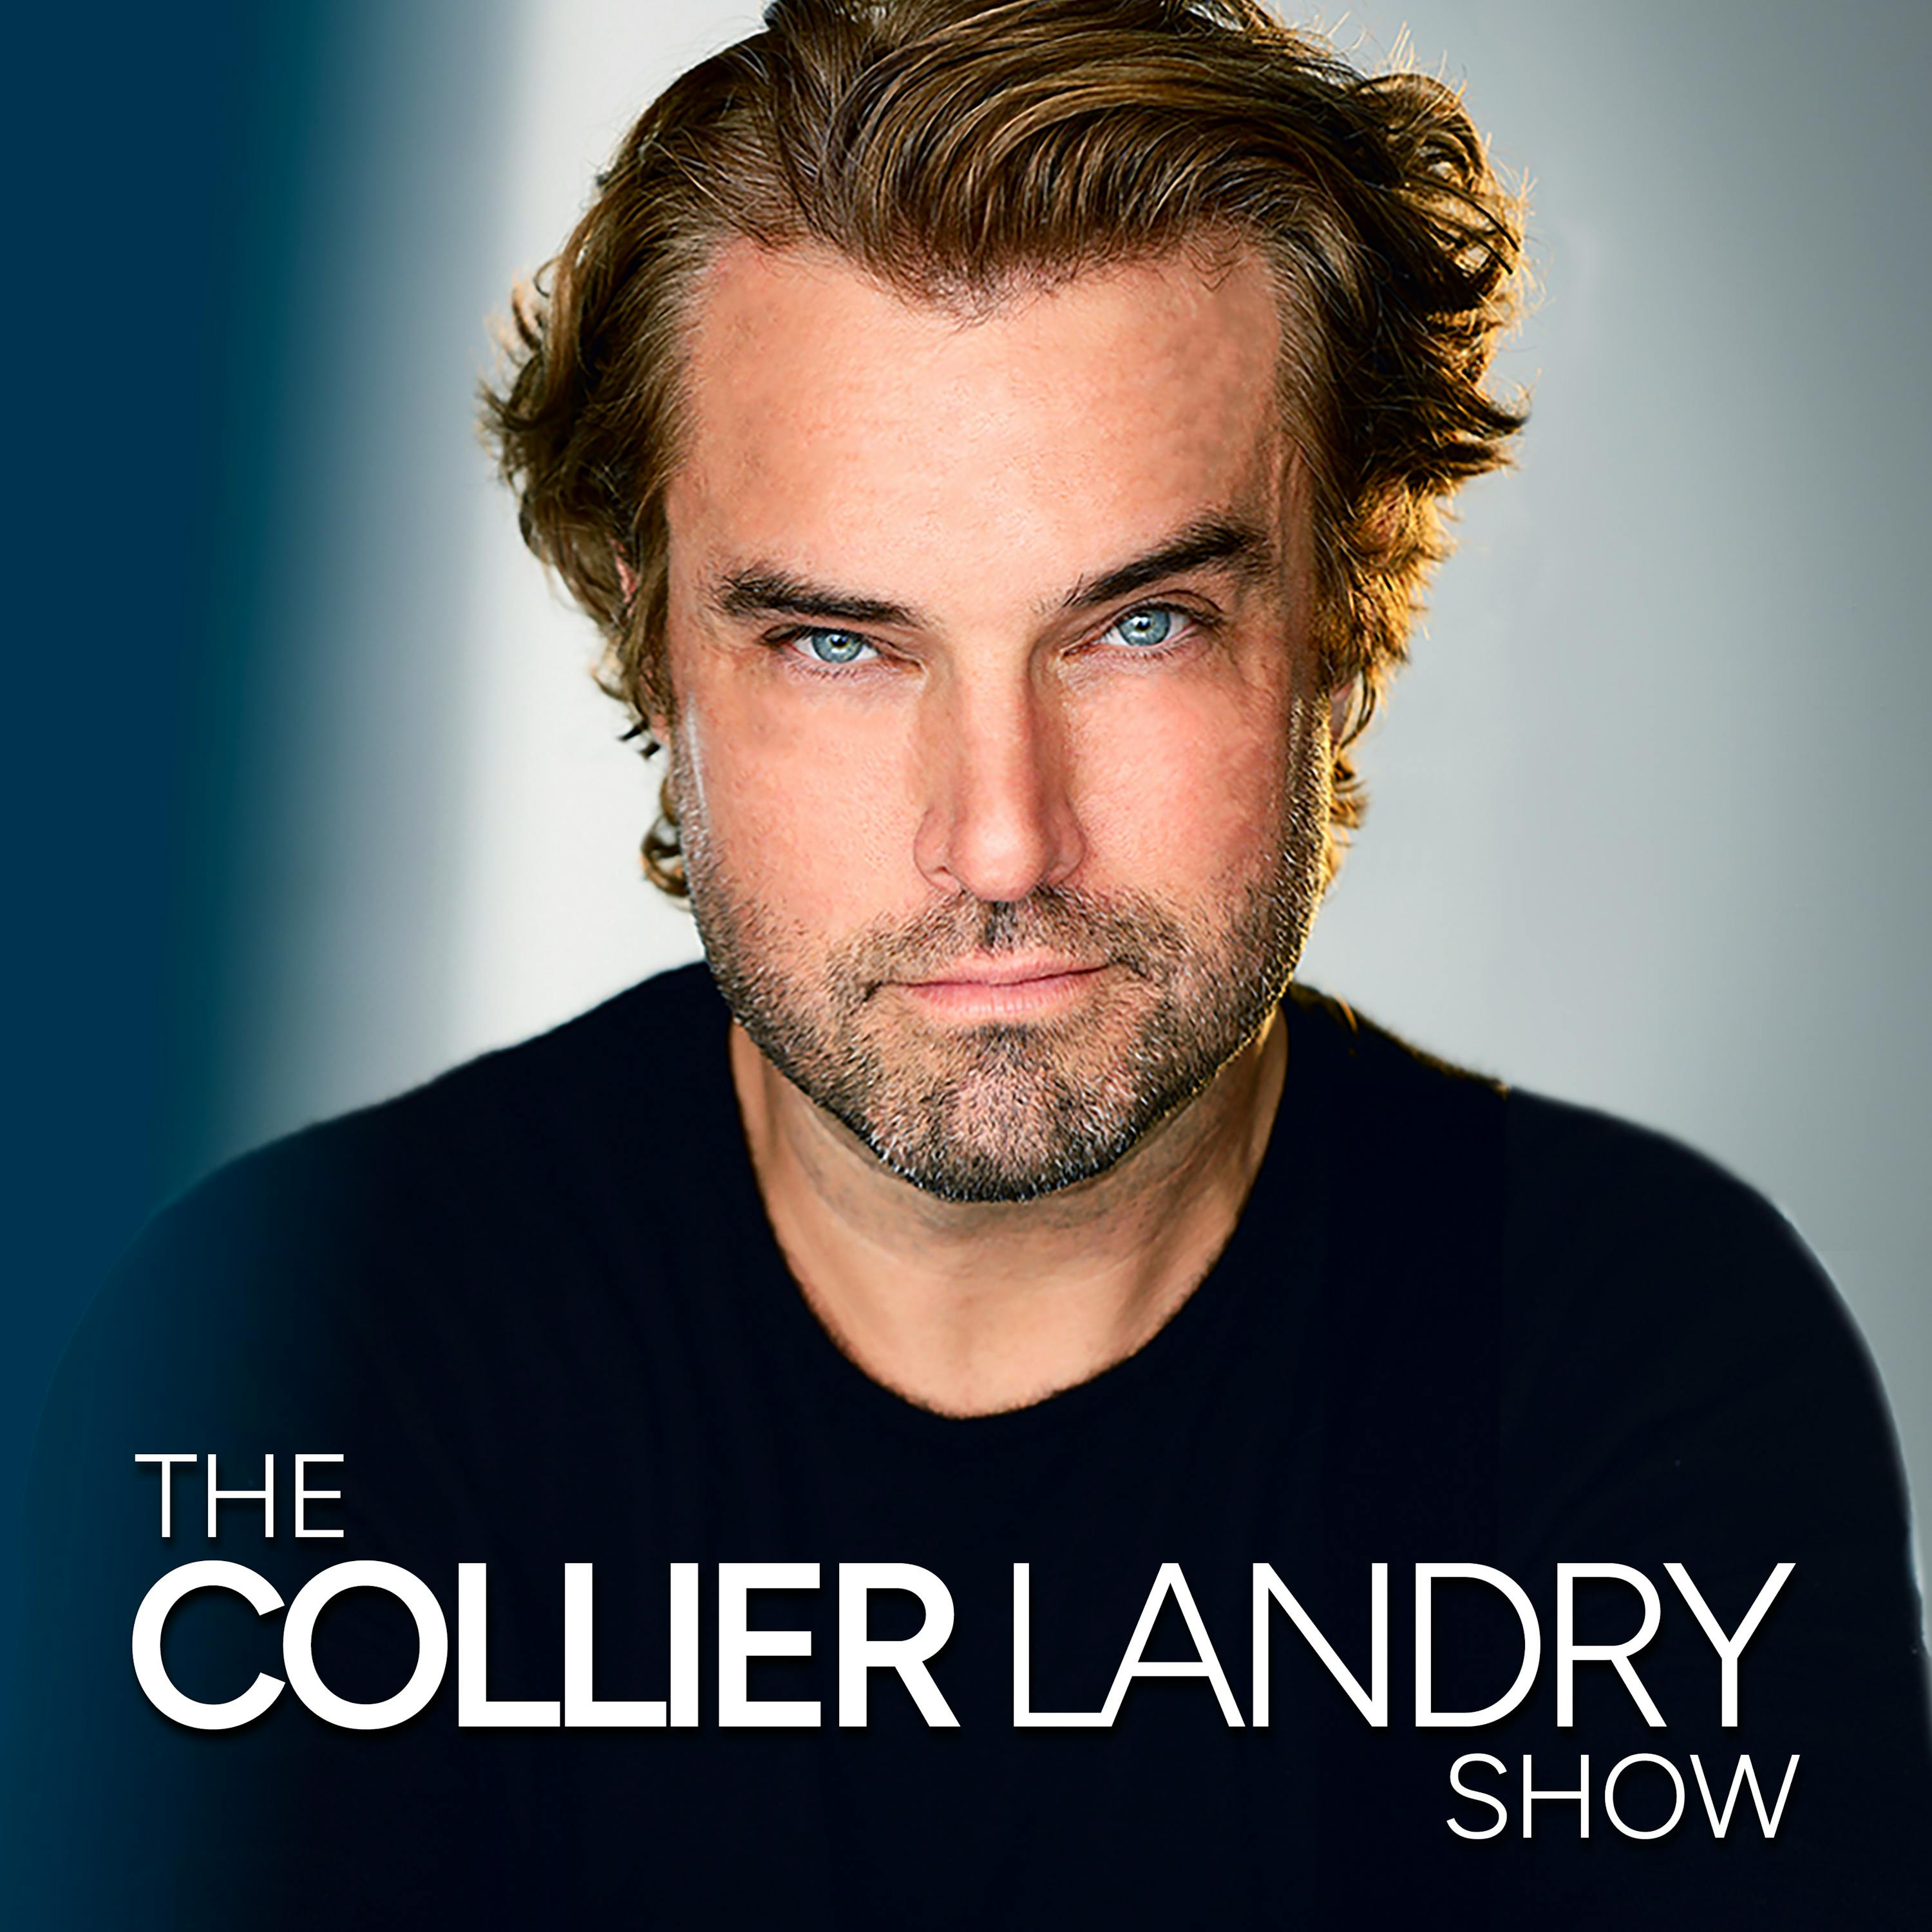 The Collier Landry Show